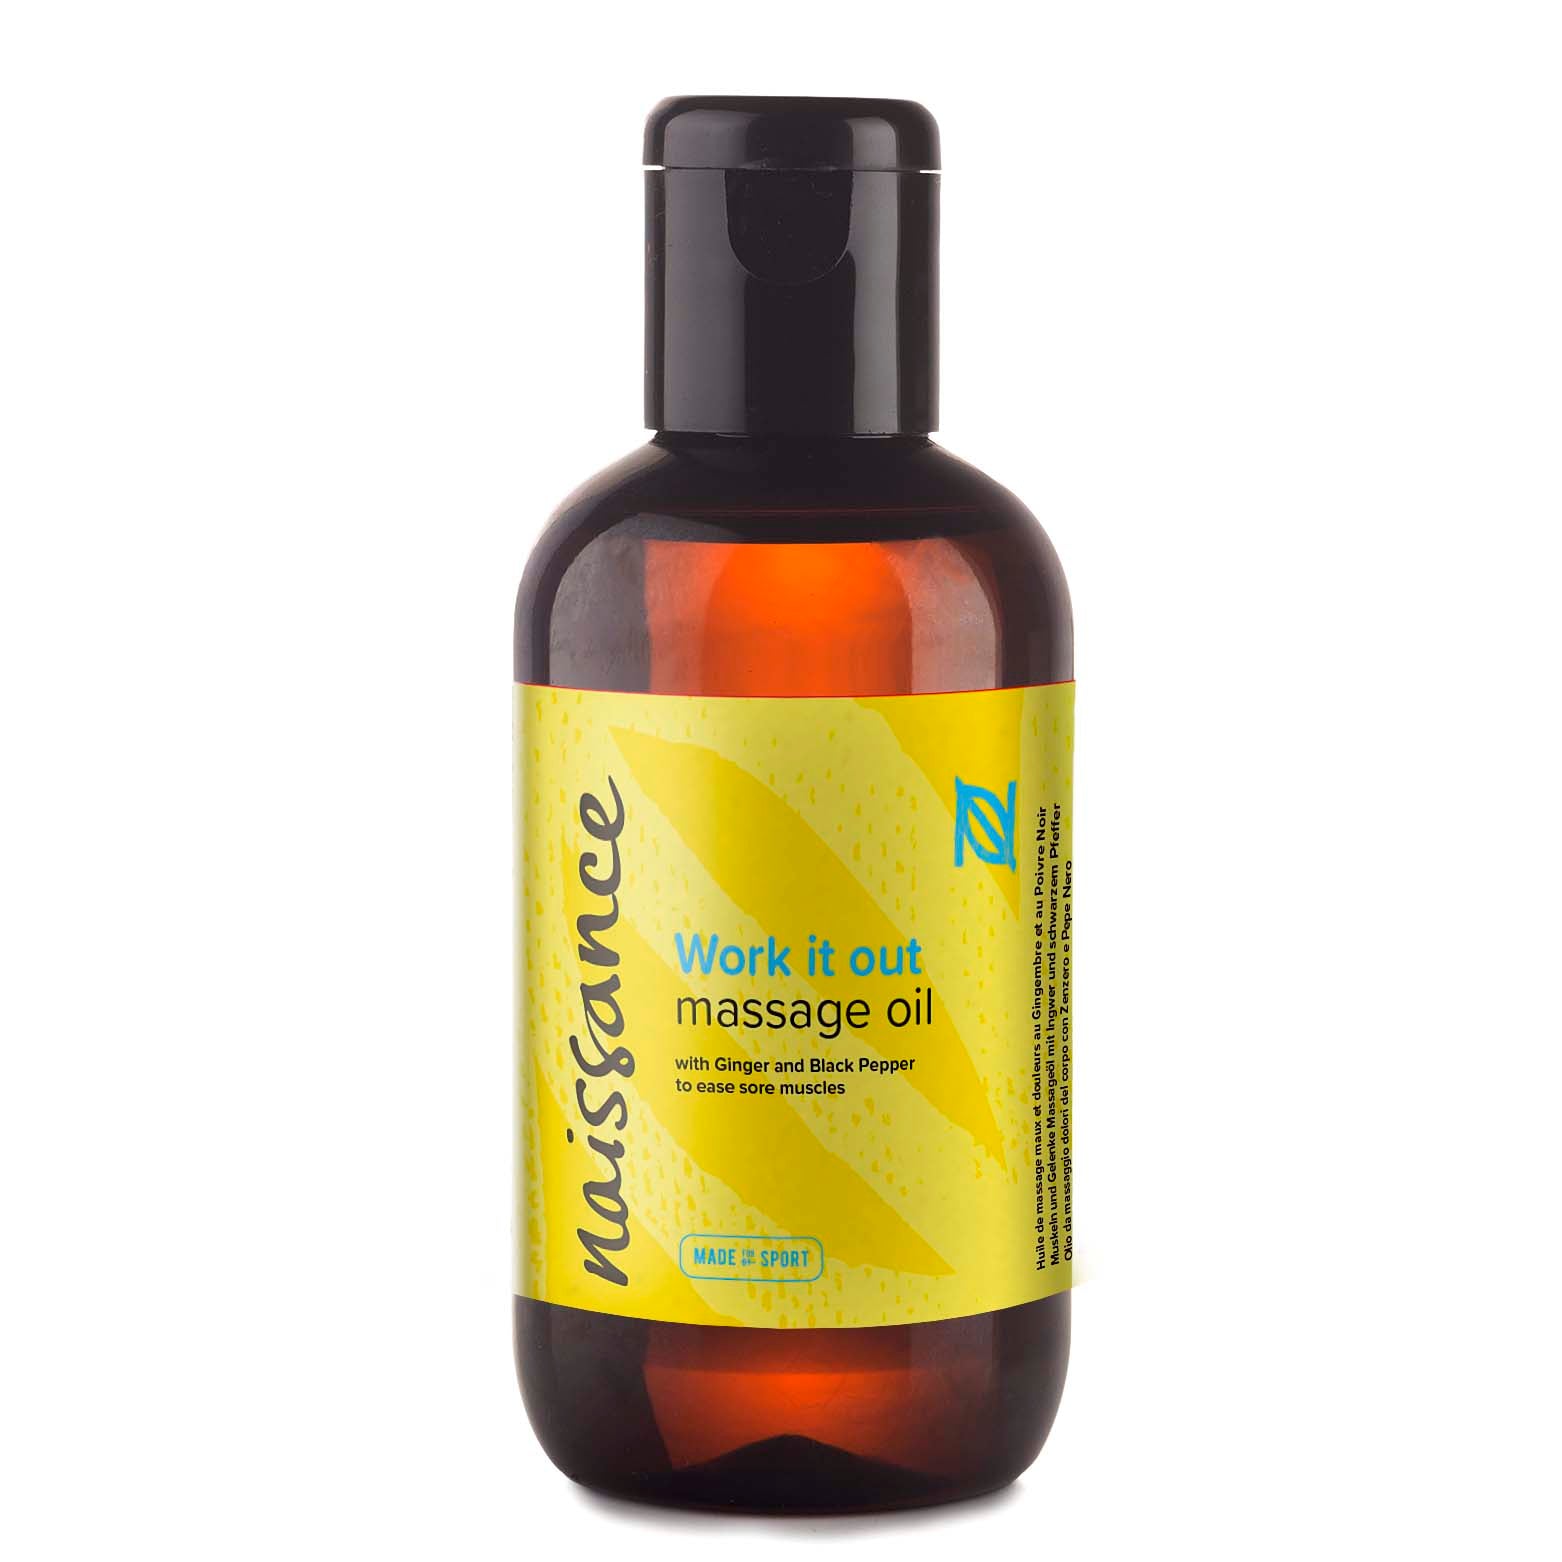 Work it Out Massage Oil